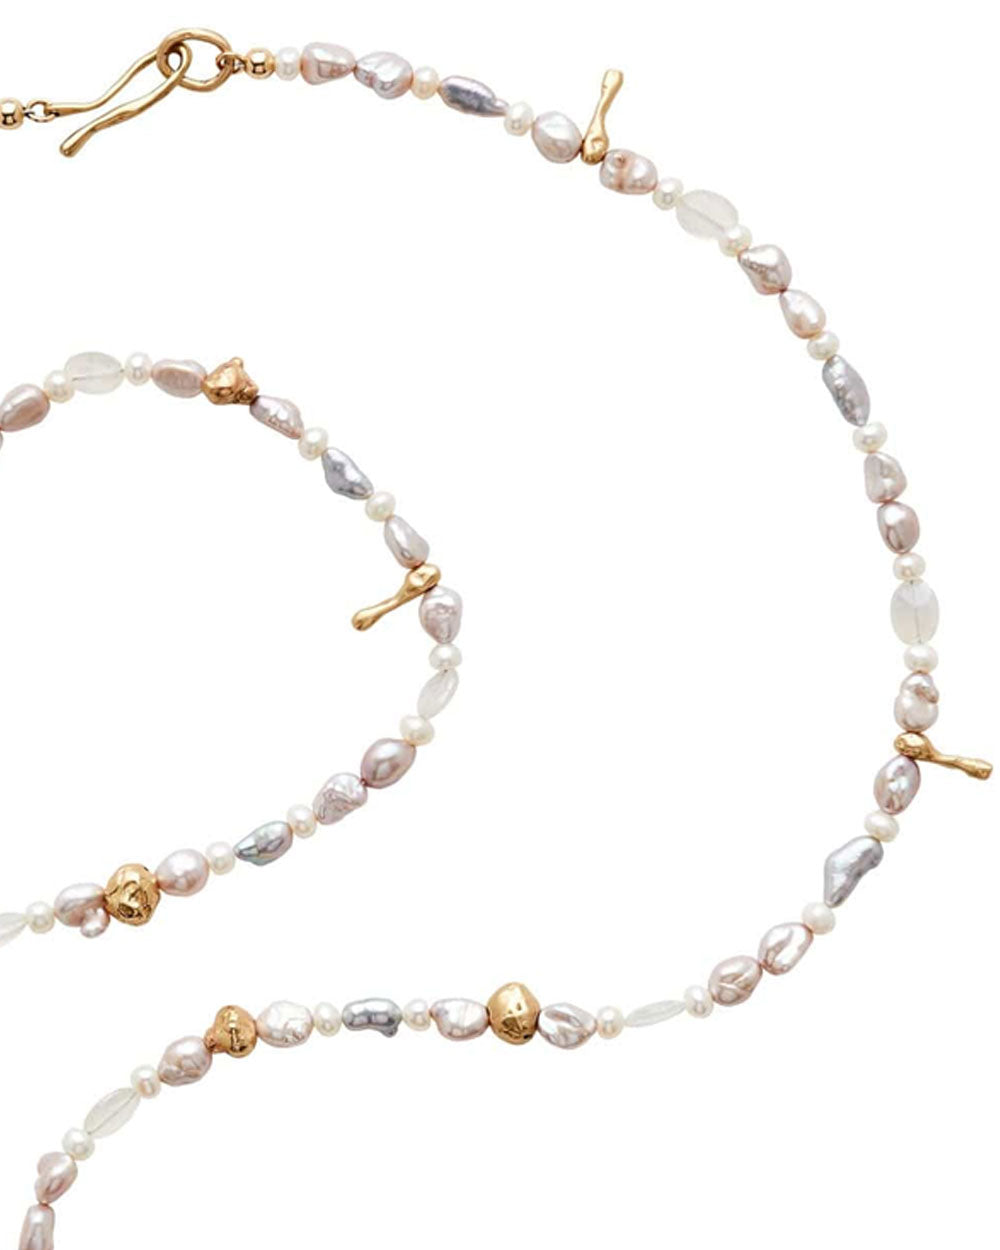 Blush Pearl and Bronze Long Necklace